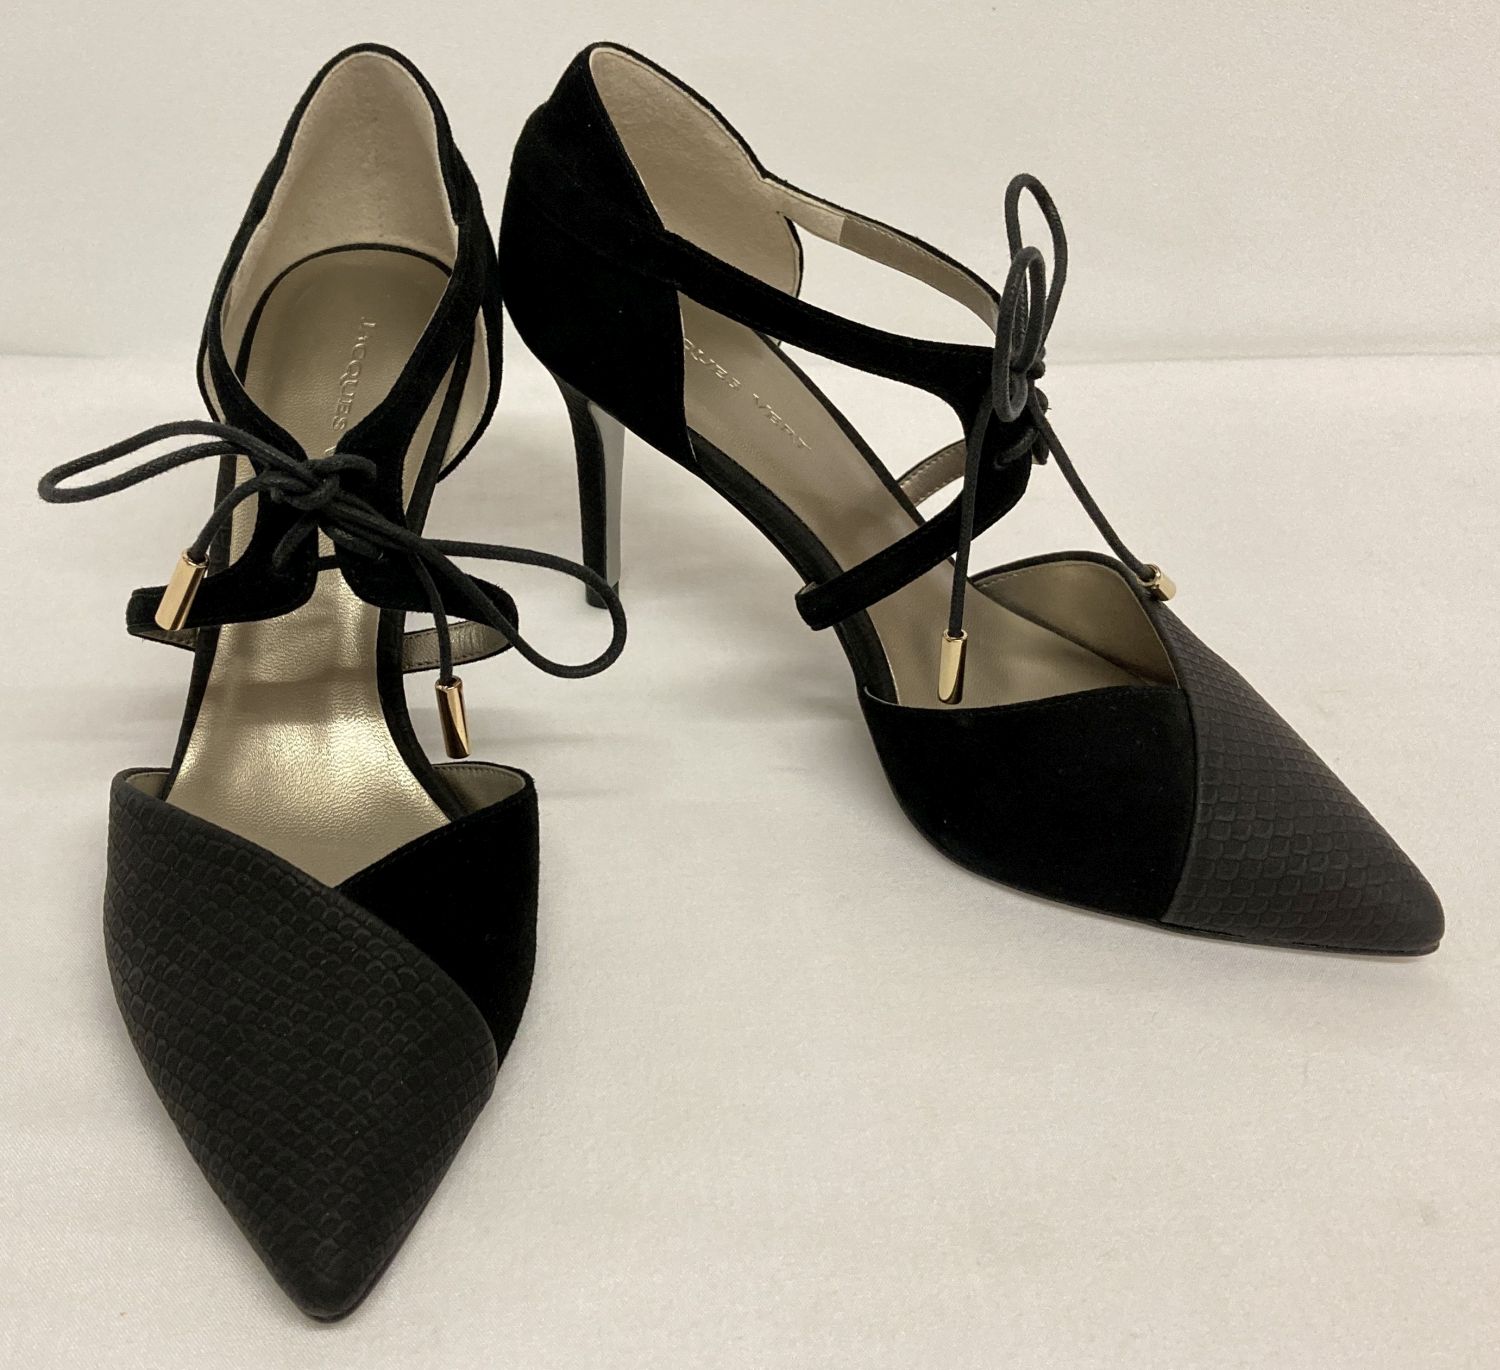 A pair of Jacques Vert black suede and soft leather occasion wear stiletto healed shoes.